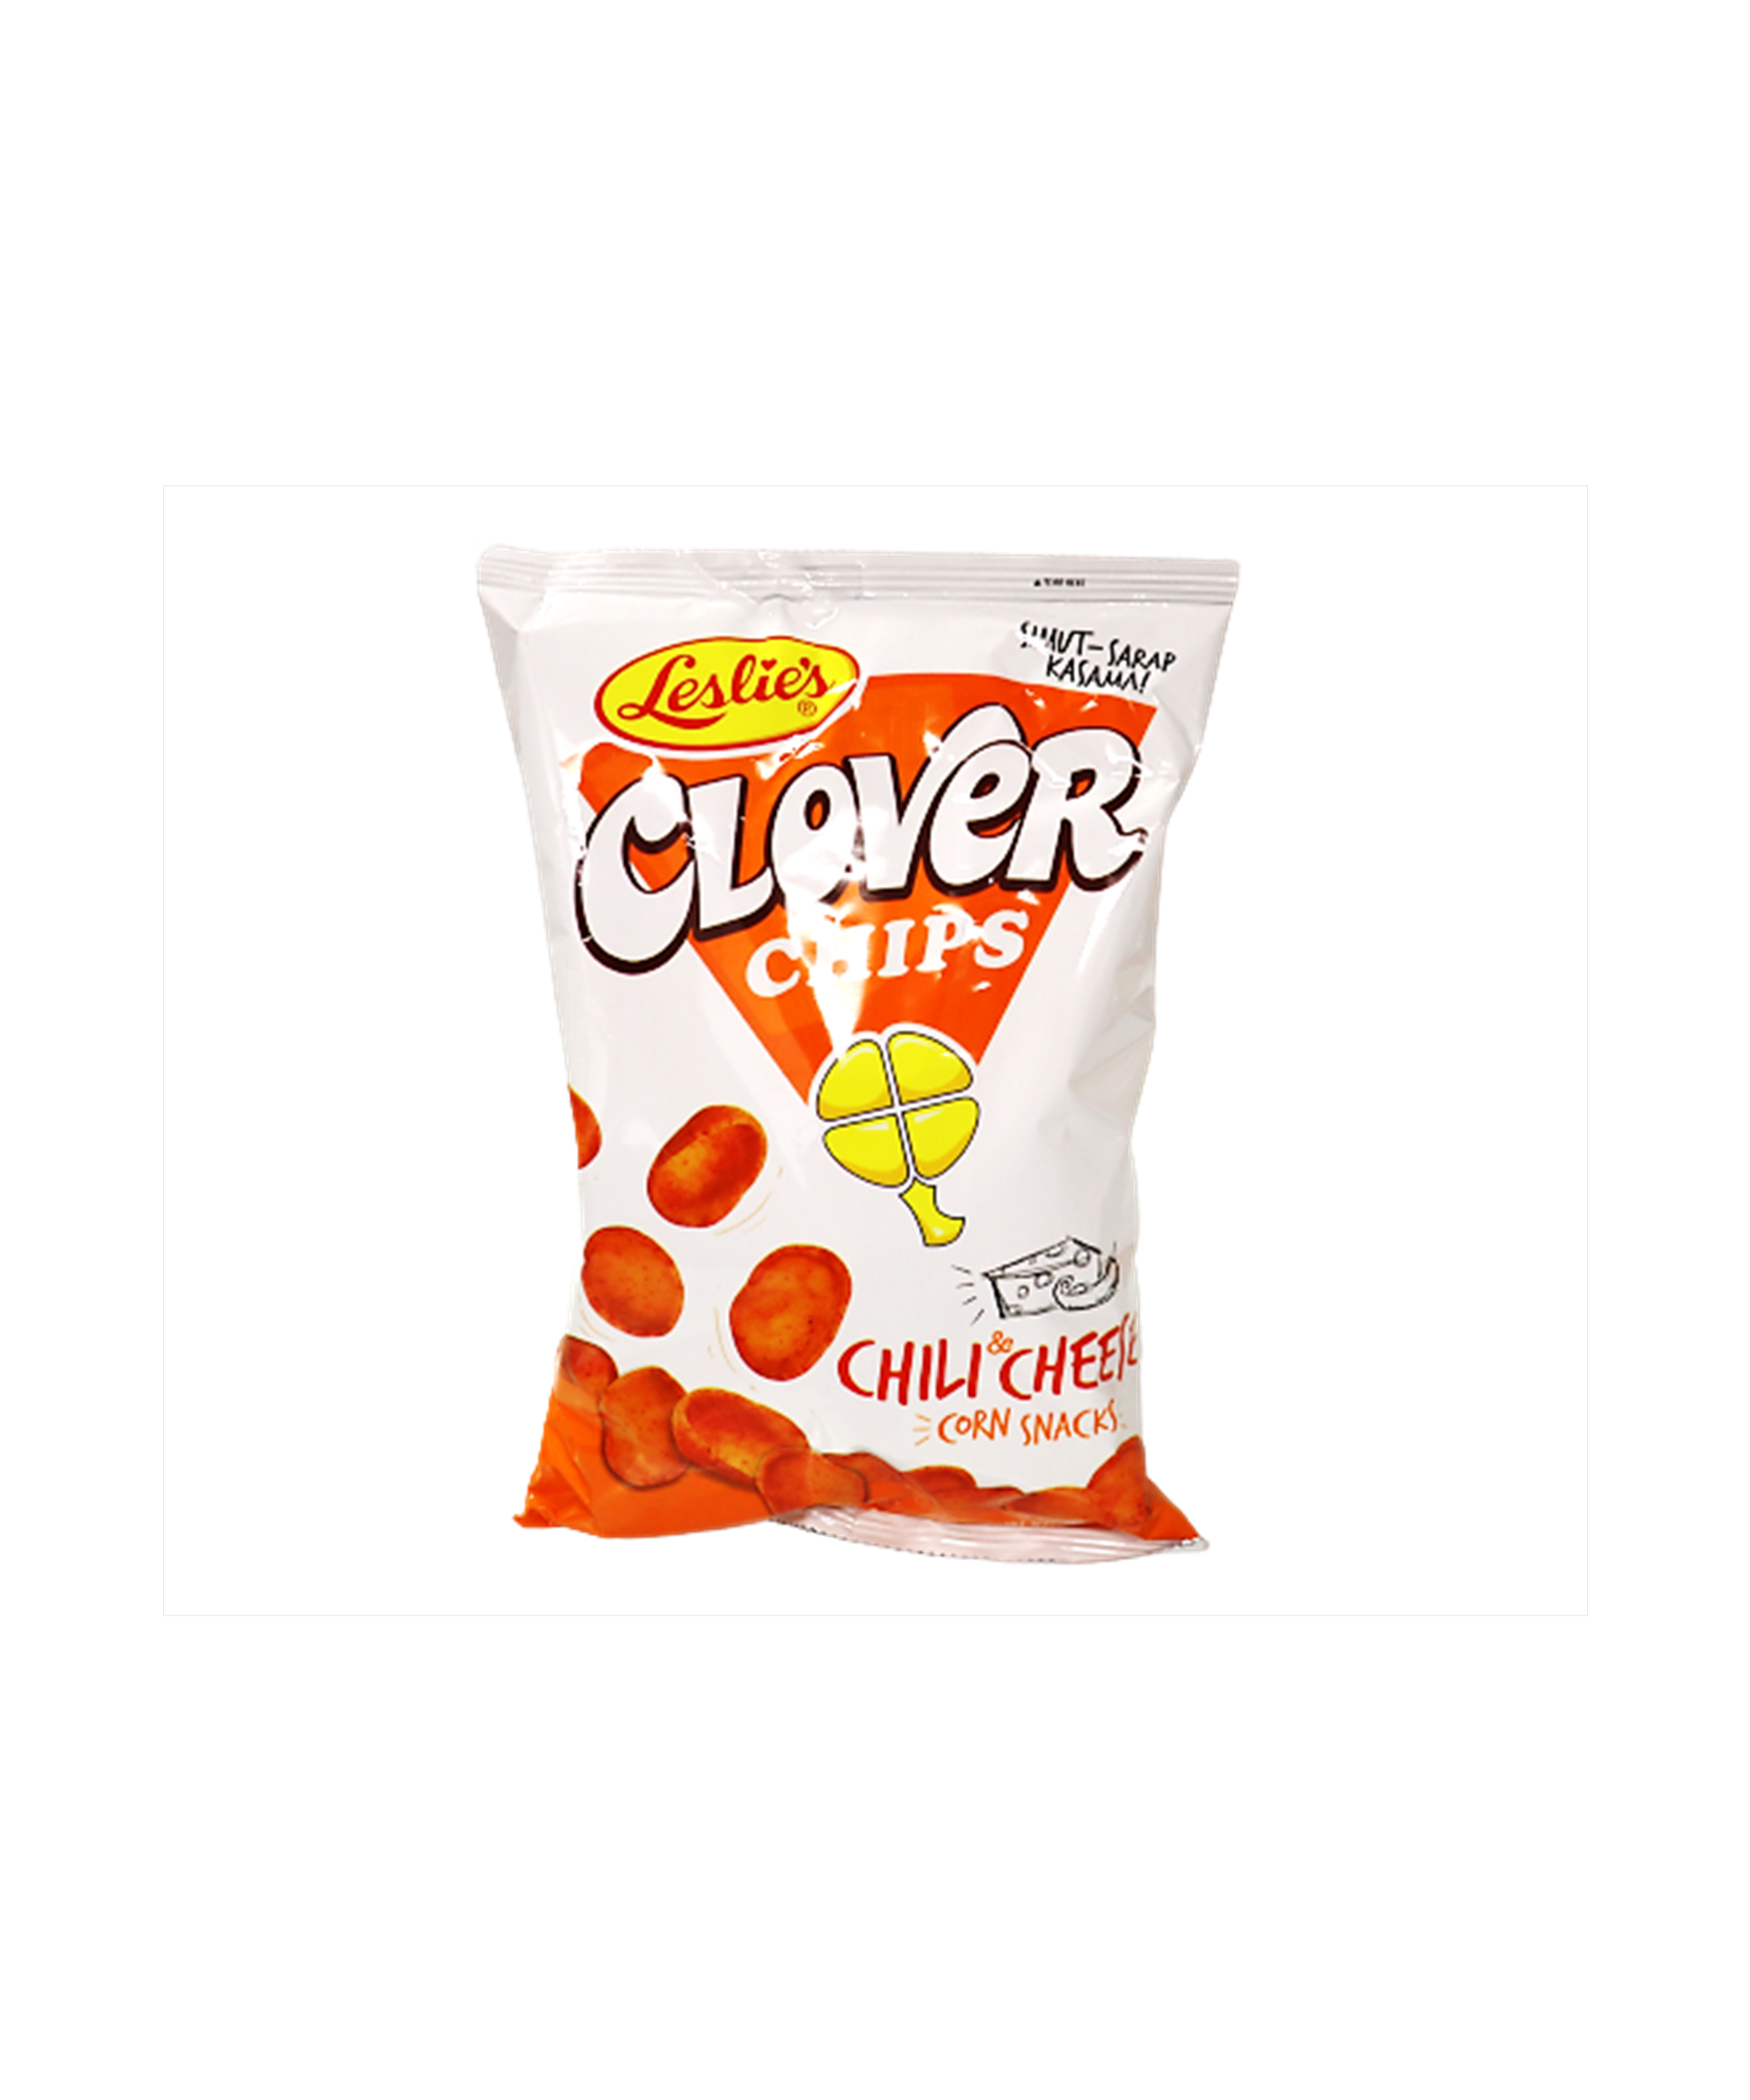 Leslie’s Clover Chips Chili & Cheese 145g